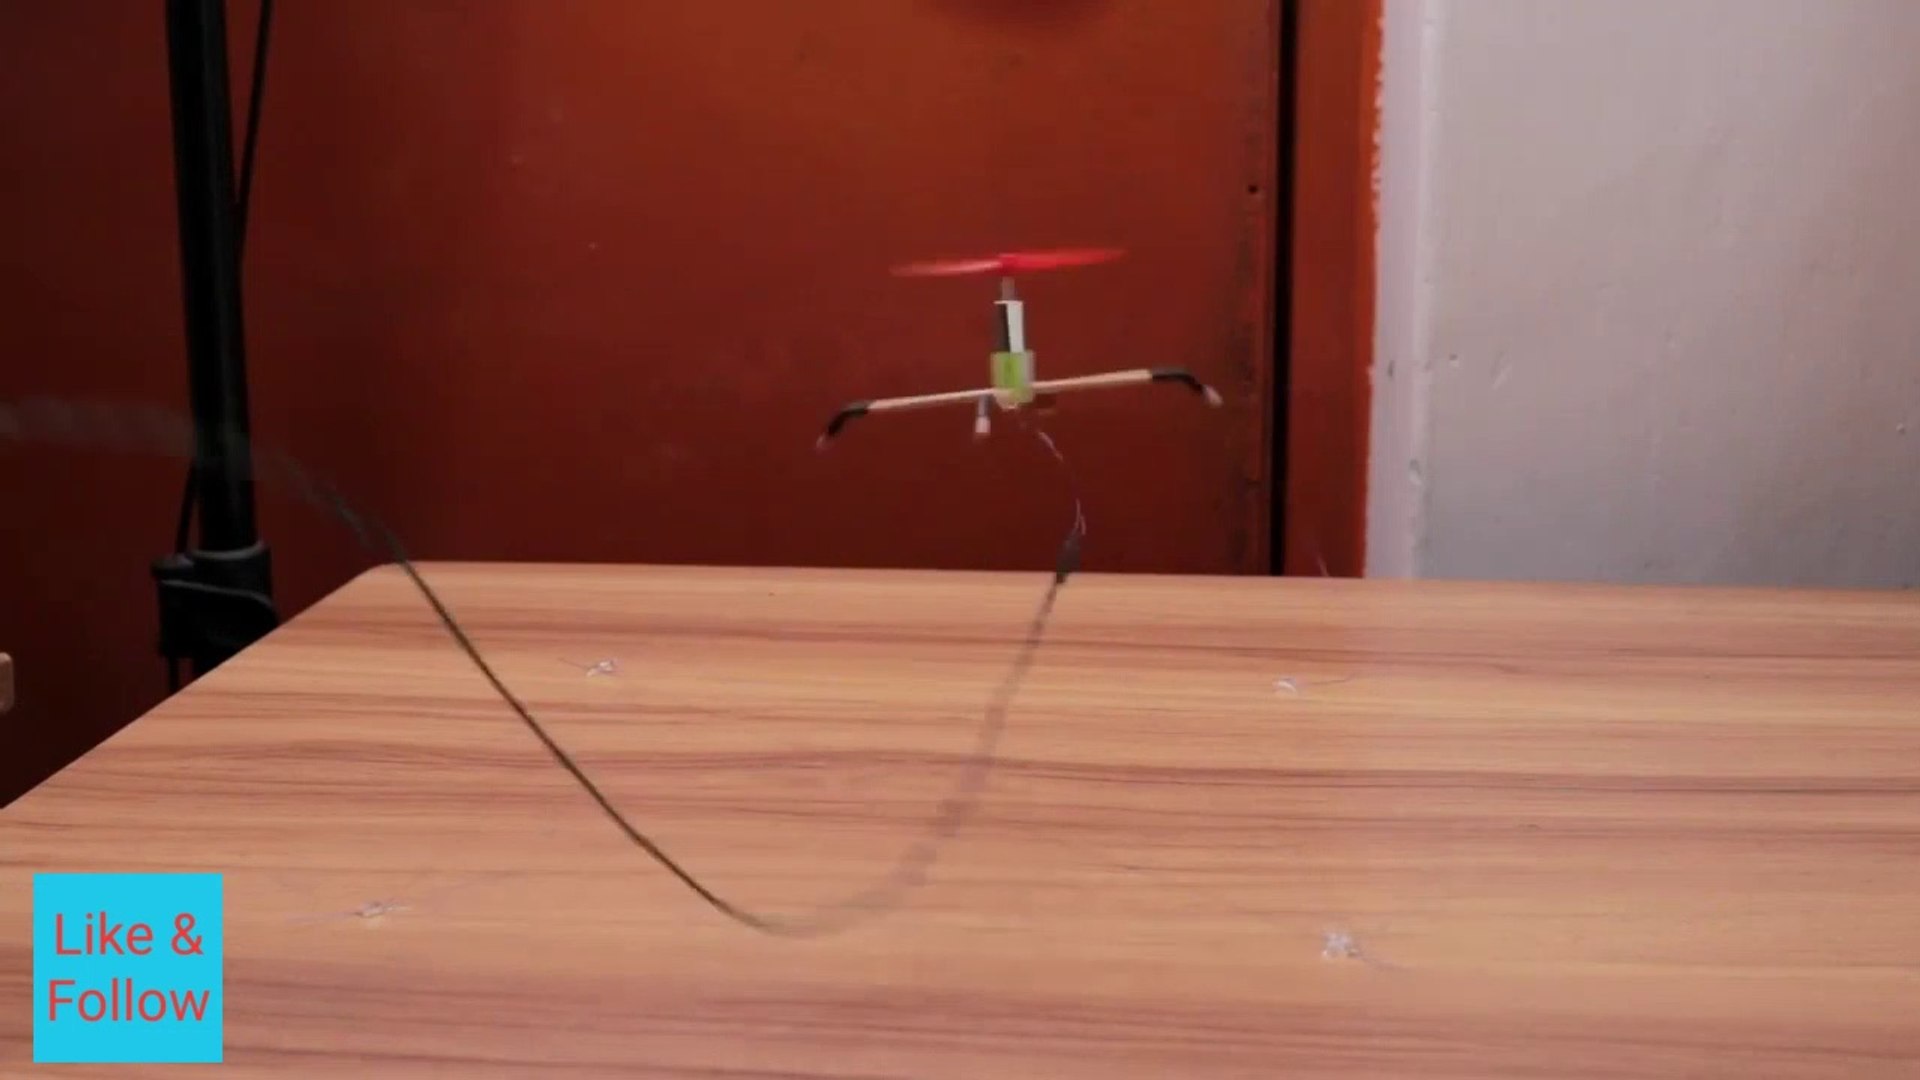 How to make a Flying Drone using Single Motor - video Dailymotion